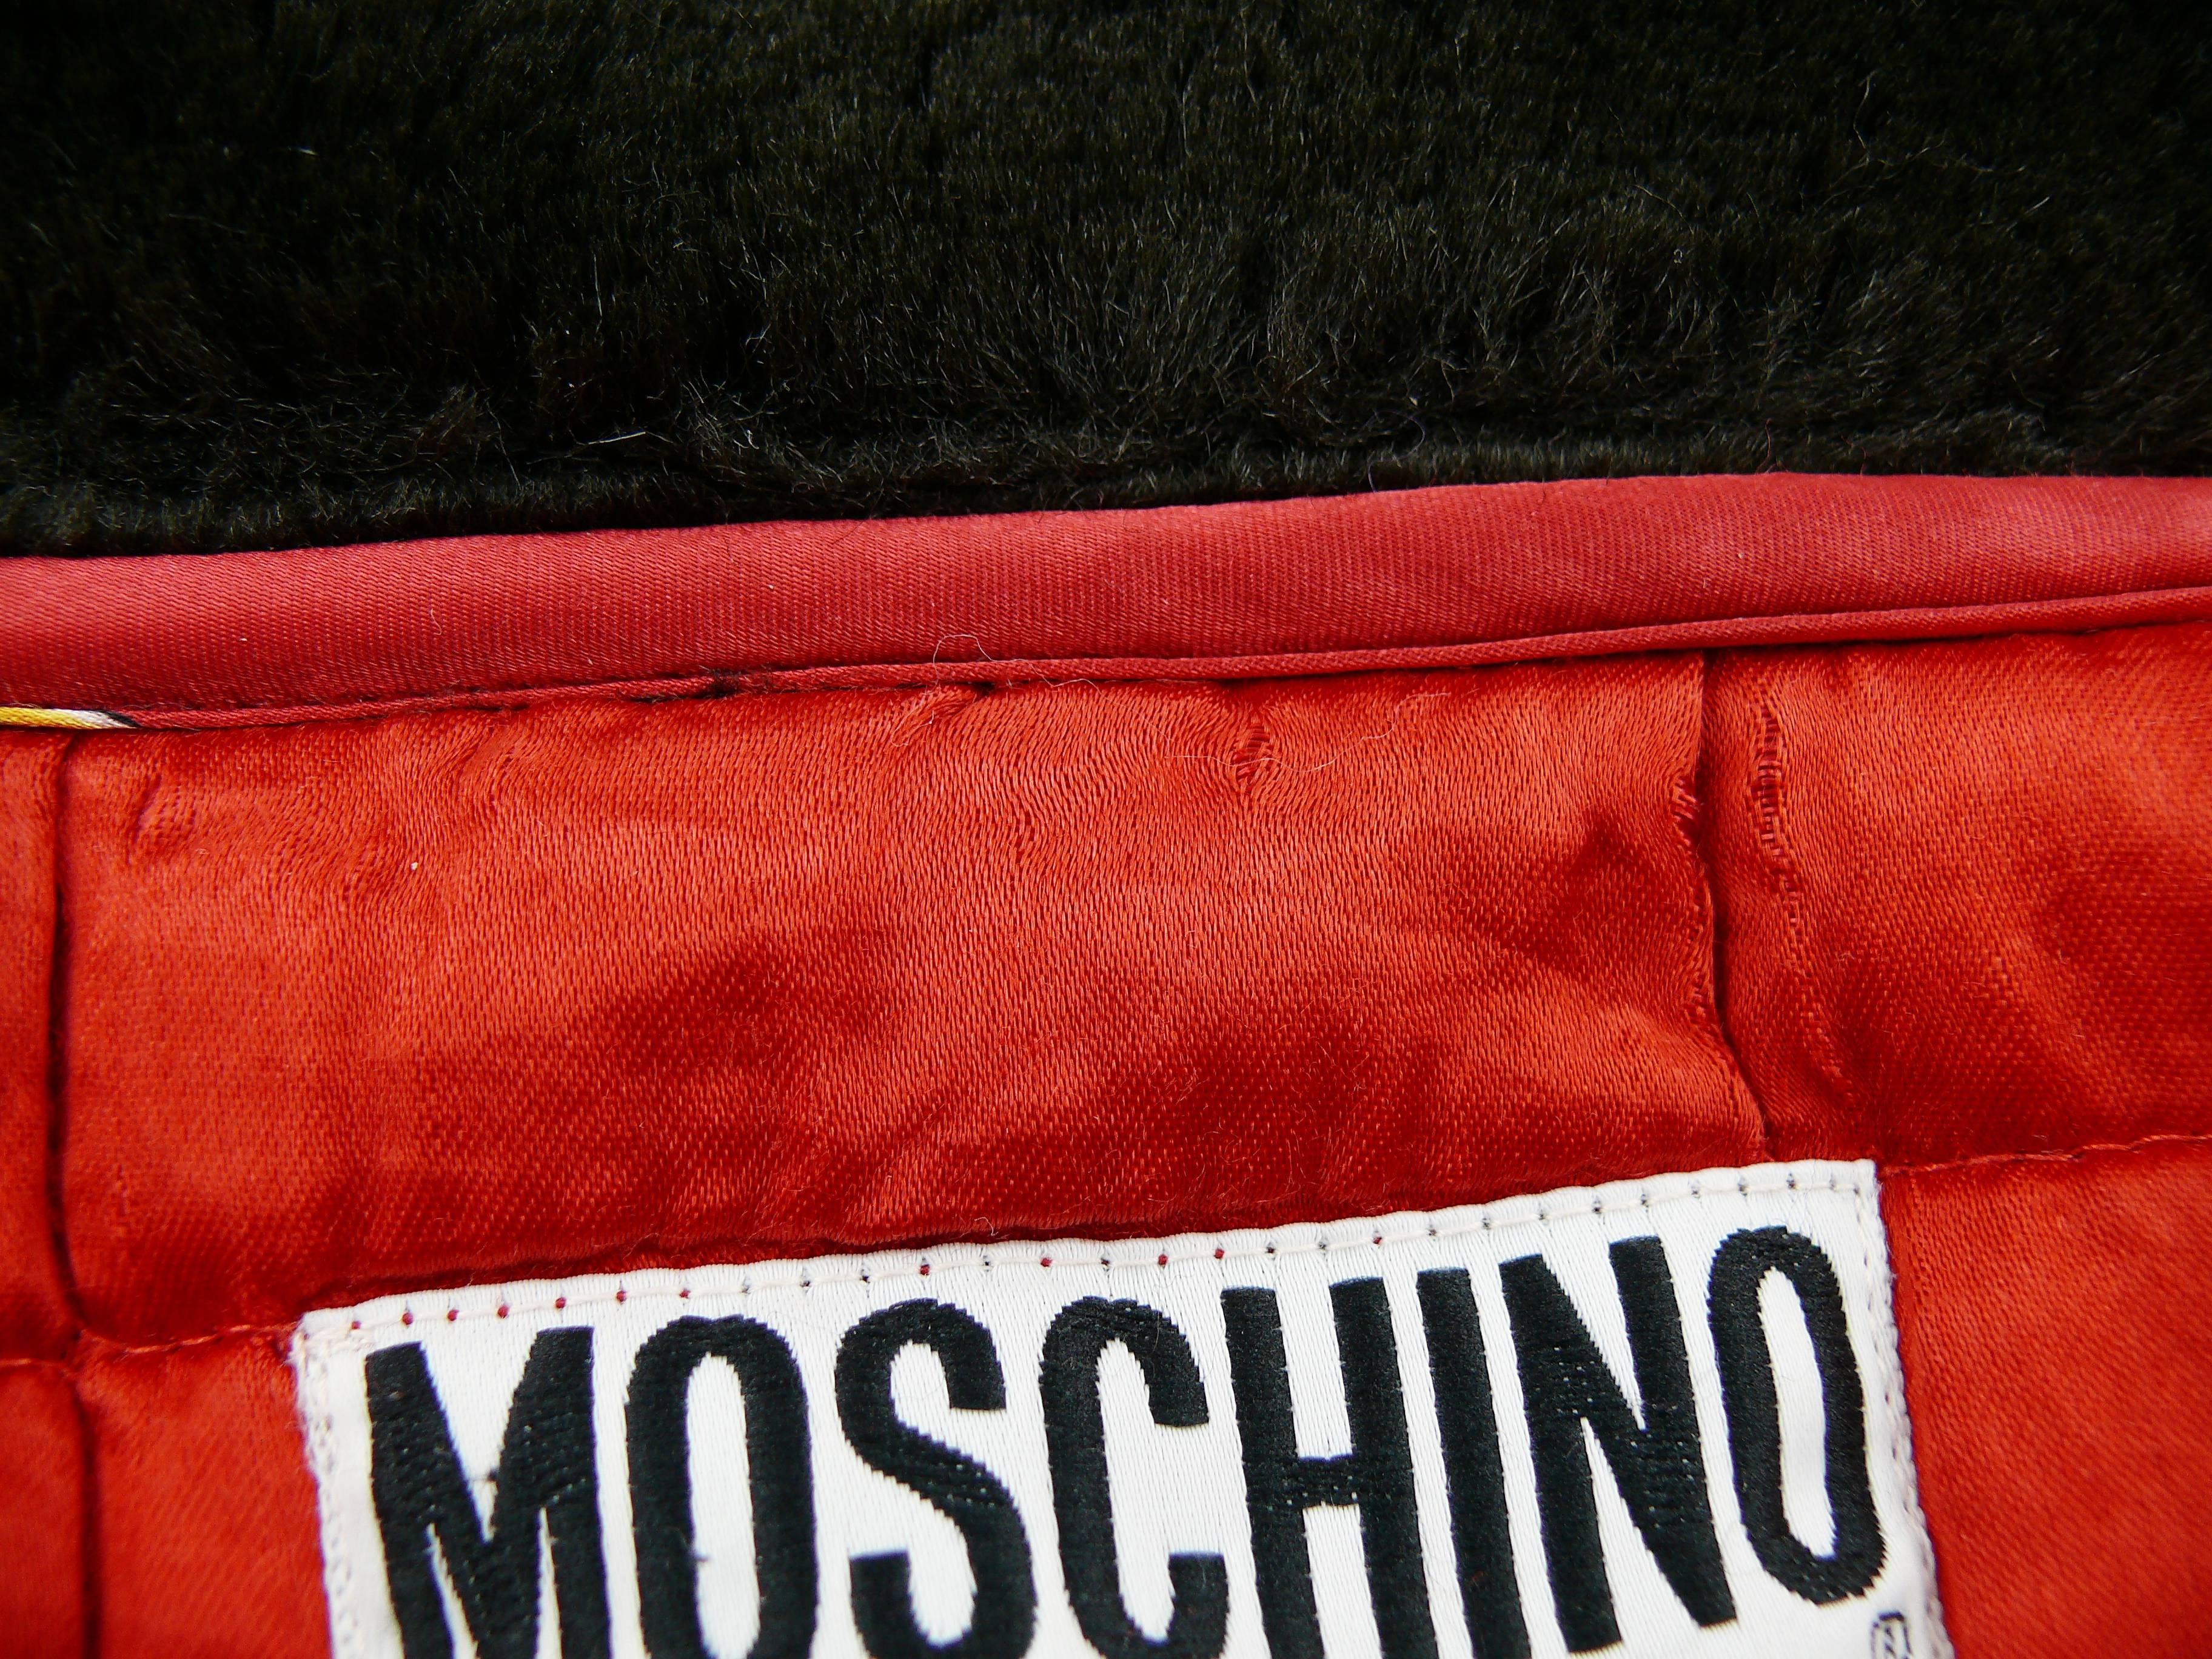 Moschino Jeans Vintage Iconic Slotter Casino Game Bomber Jacket US Size 6 For Sale 2